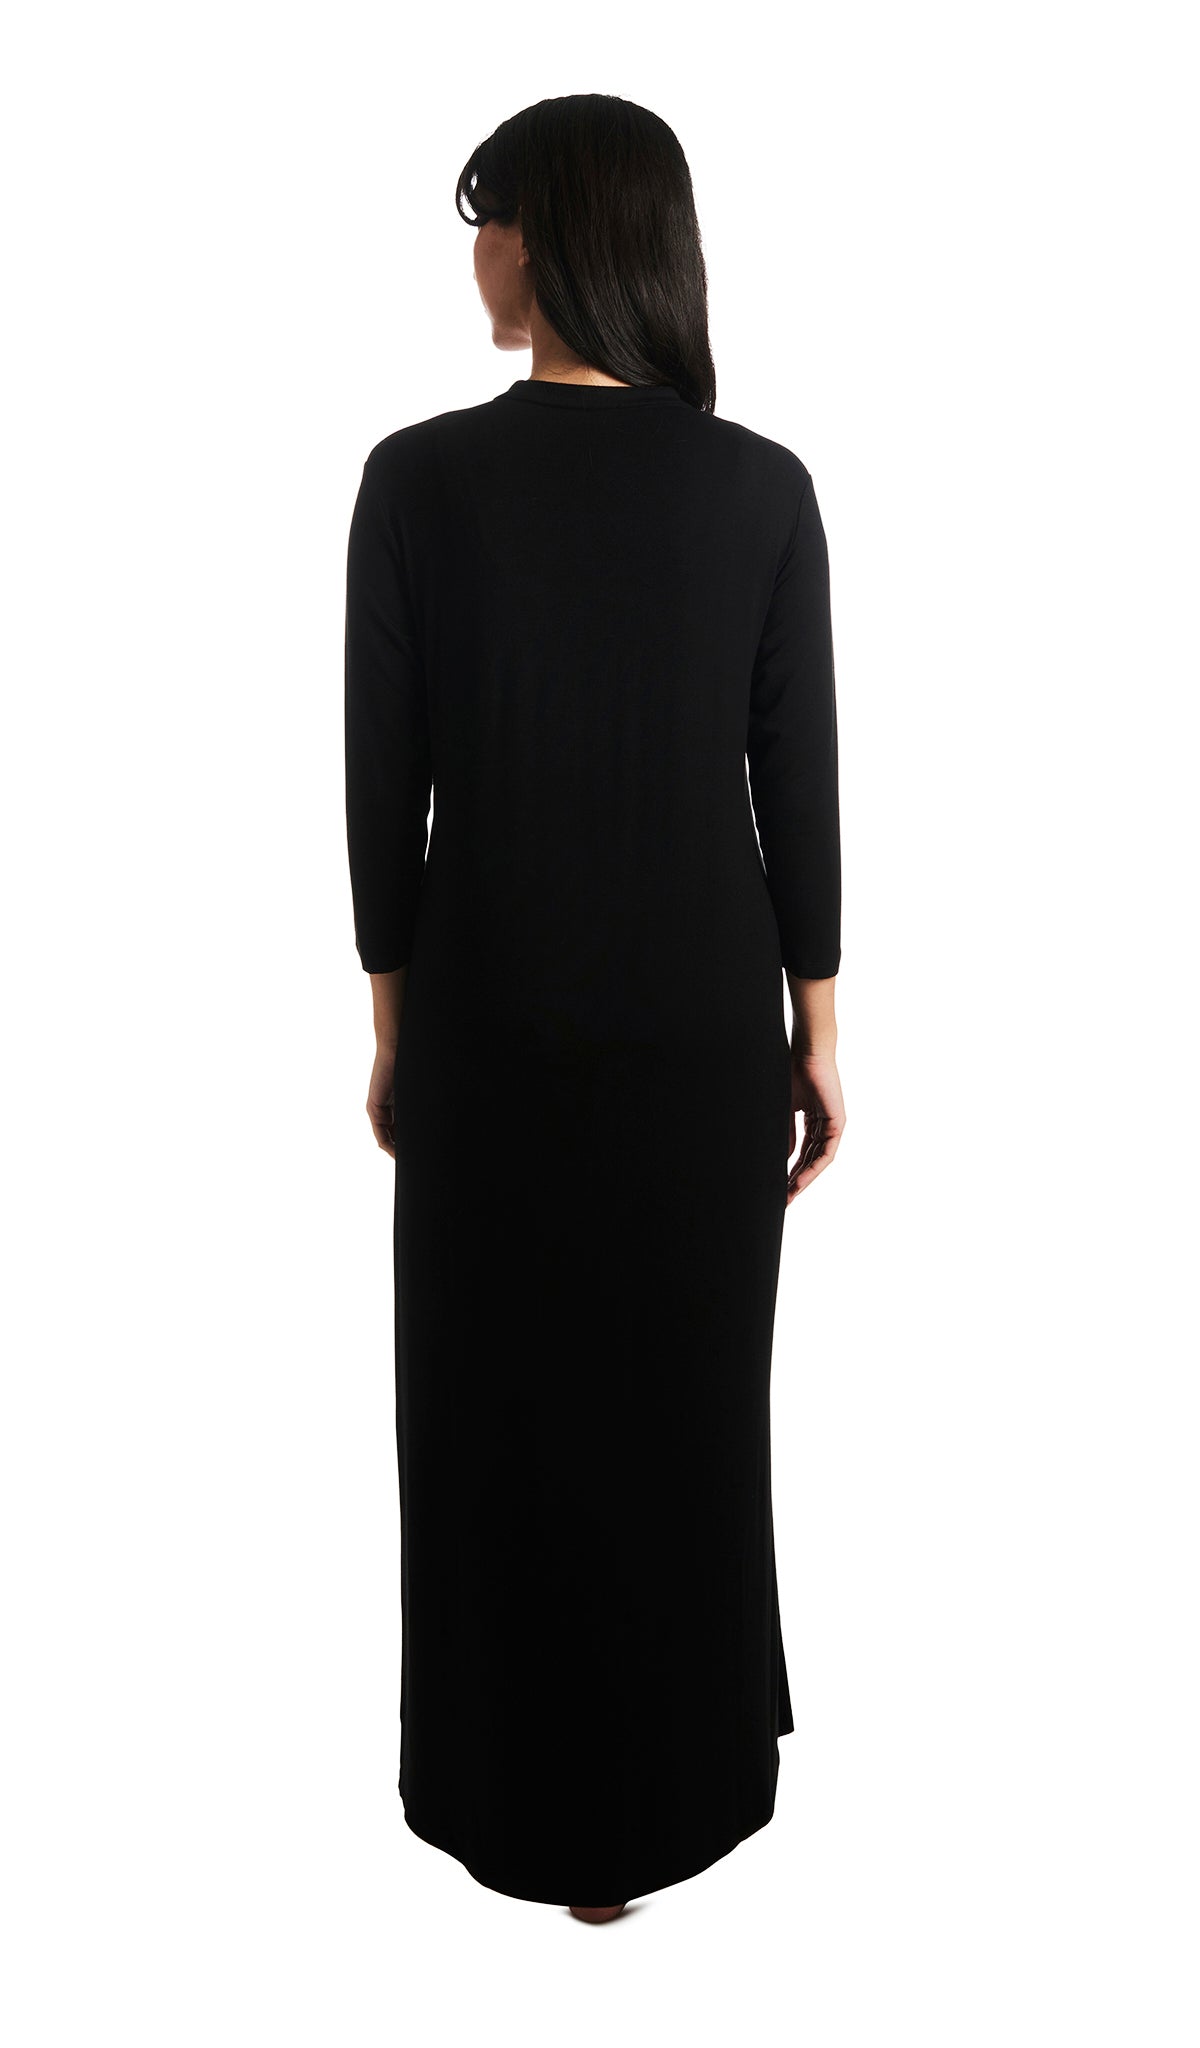 Black Juliana dress. Back shot of woman wearing long sleeve caftan with arms down to side.